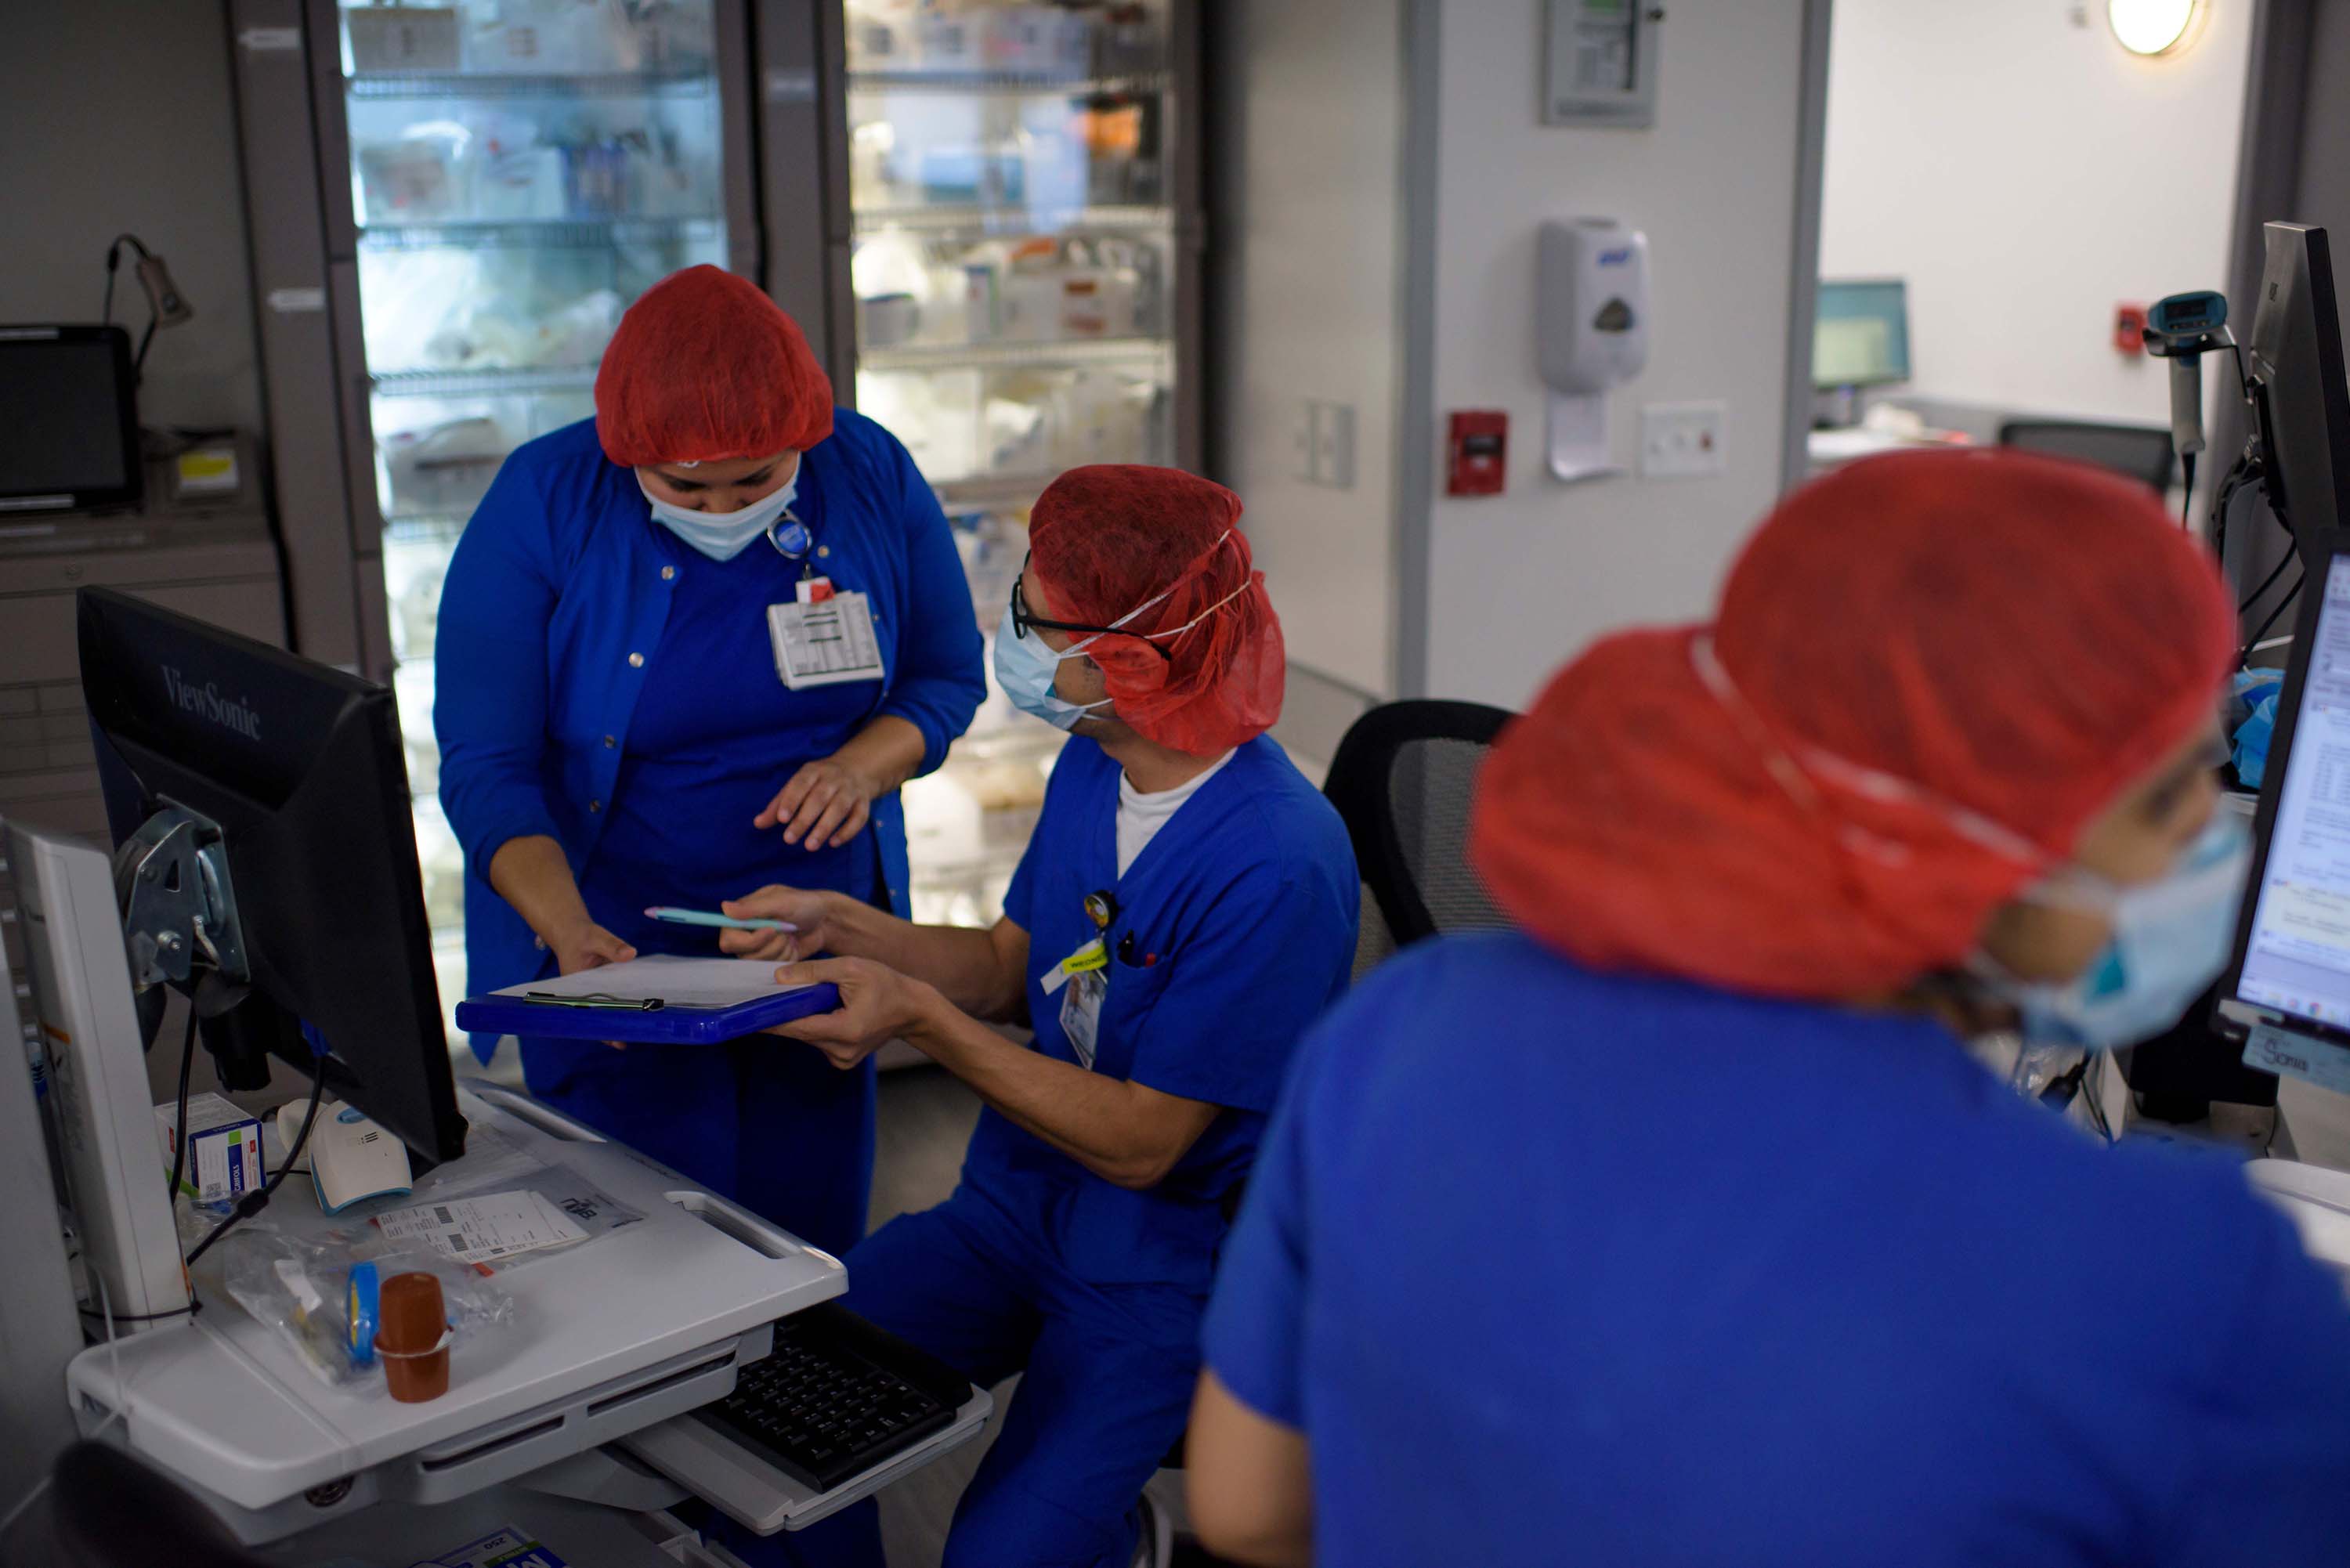 Healthcare professionals work in the ICU at Oakbend Medical Center in Richmond, Texas, on Wednesday, July 15.